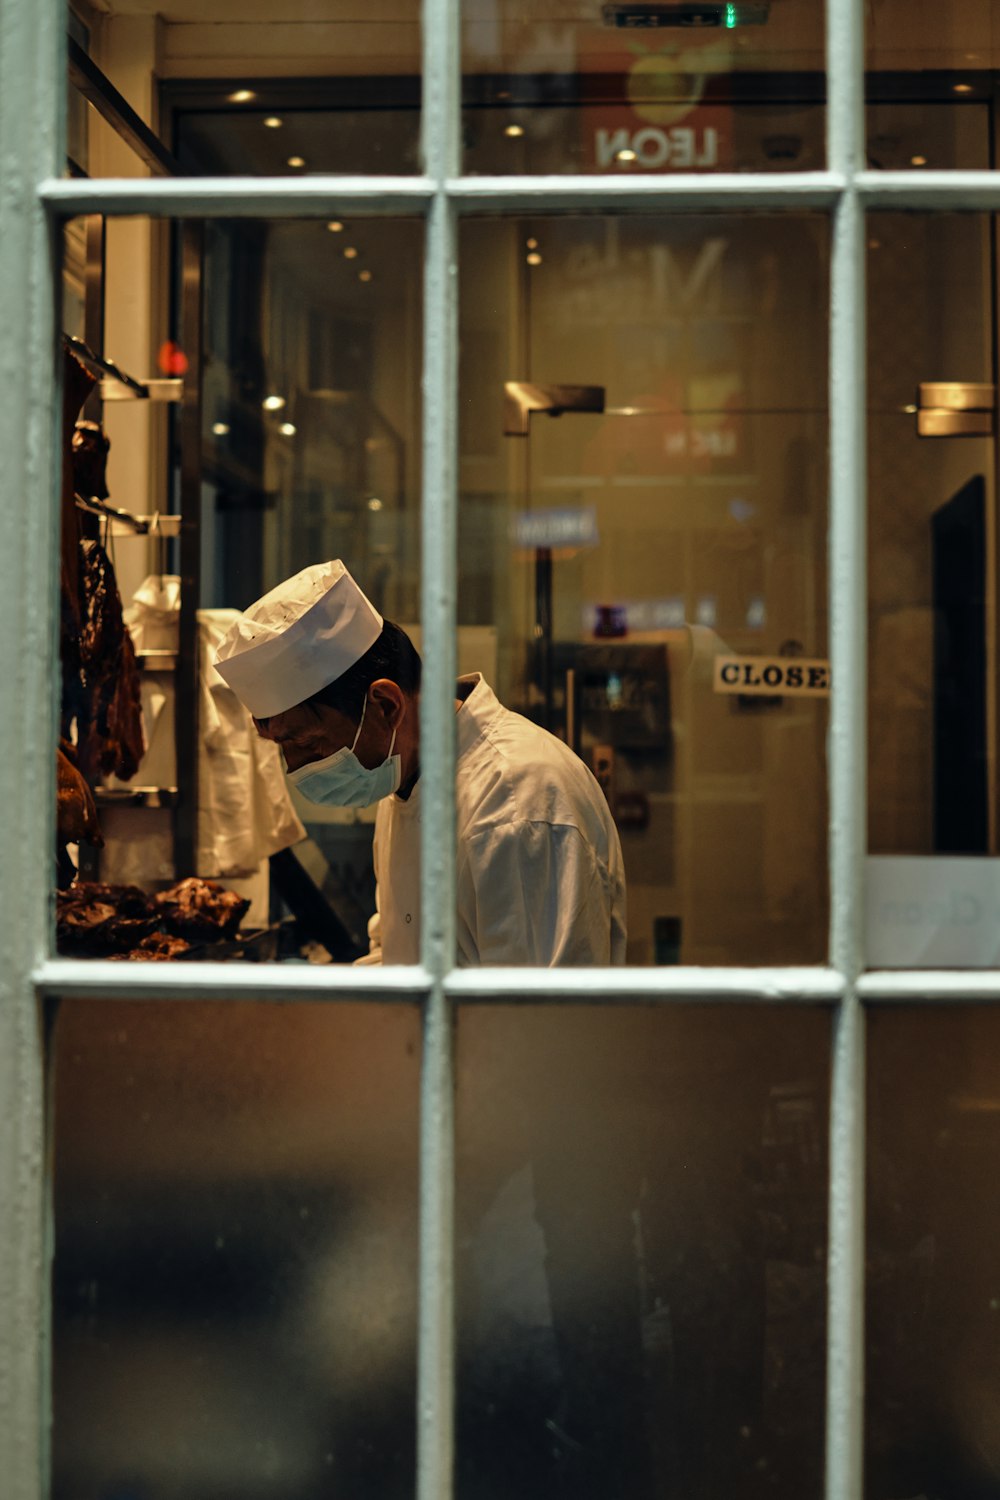 a man wearing a white hat and a white coat in a kitchen